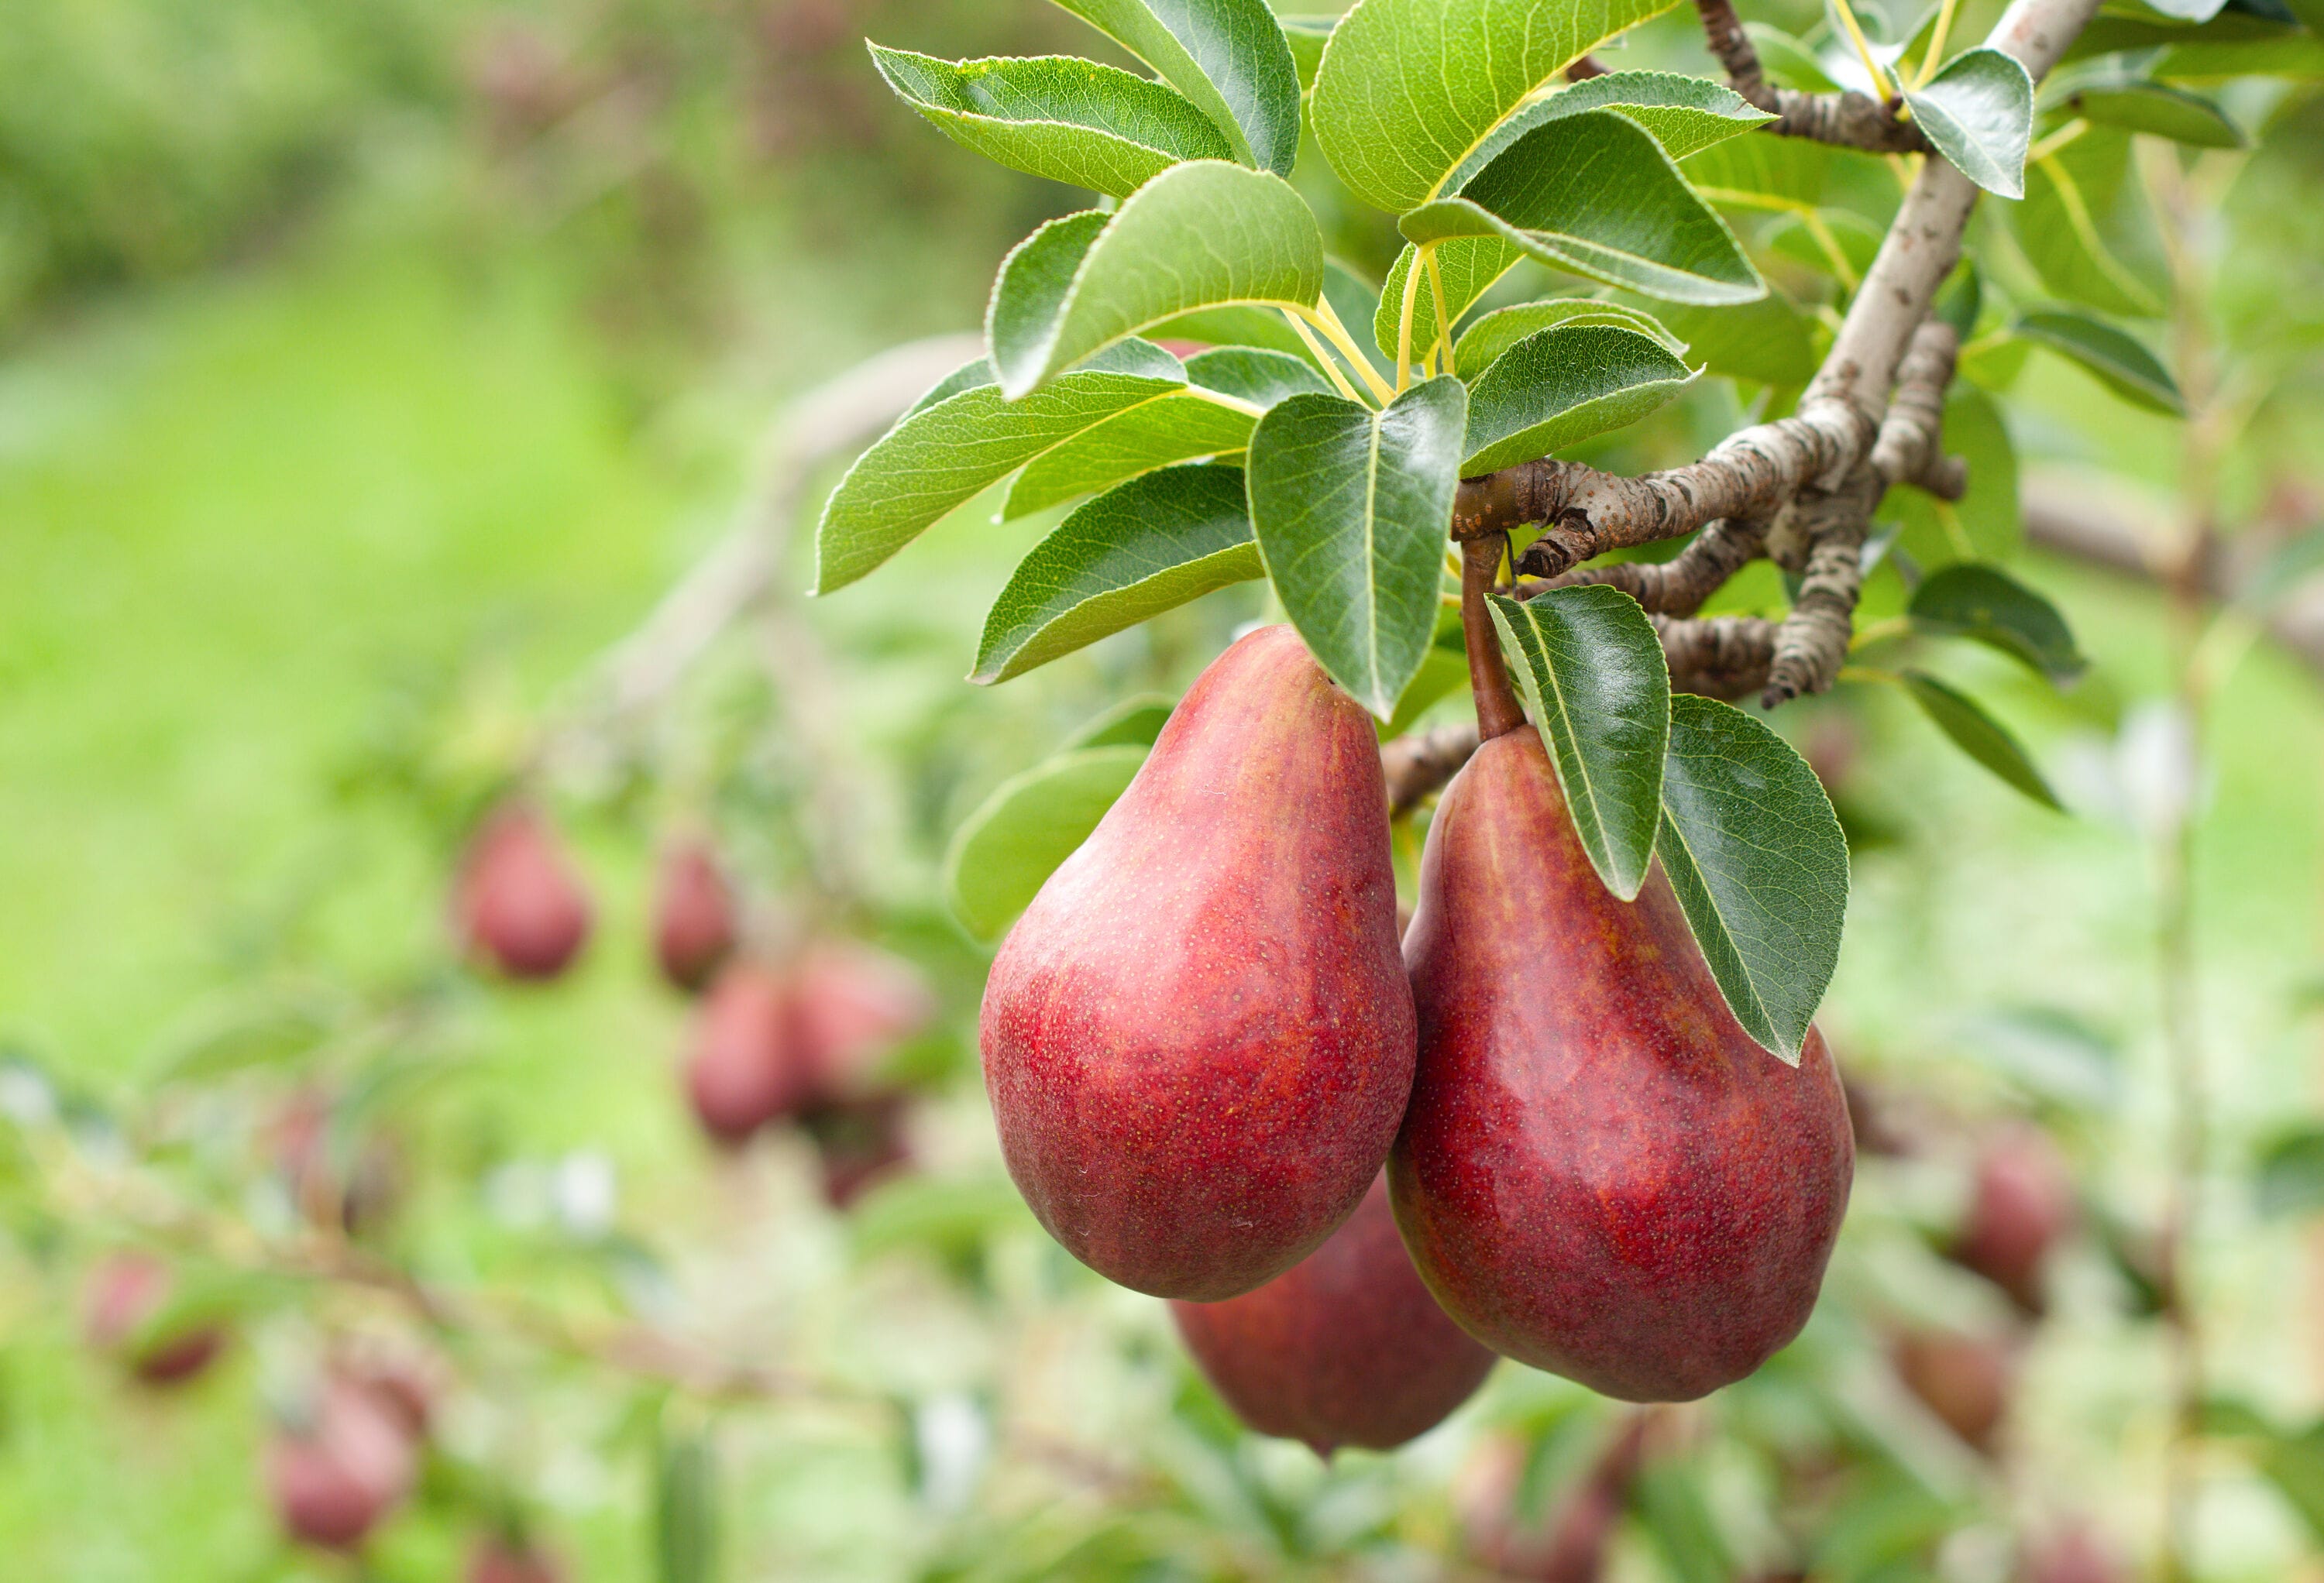 Comice Pear Tree for Sale - Buying & Growing Guide 